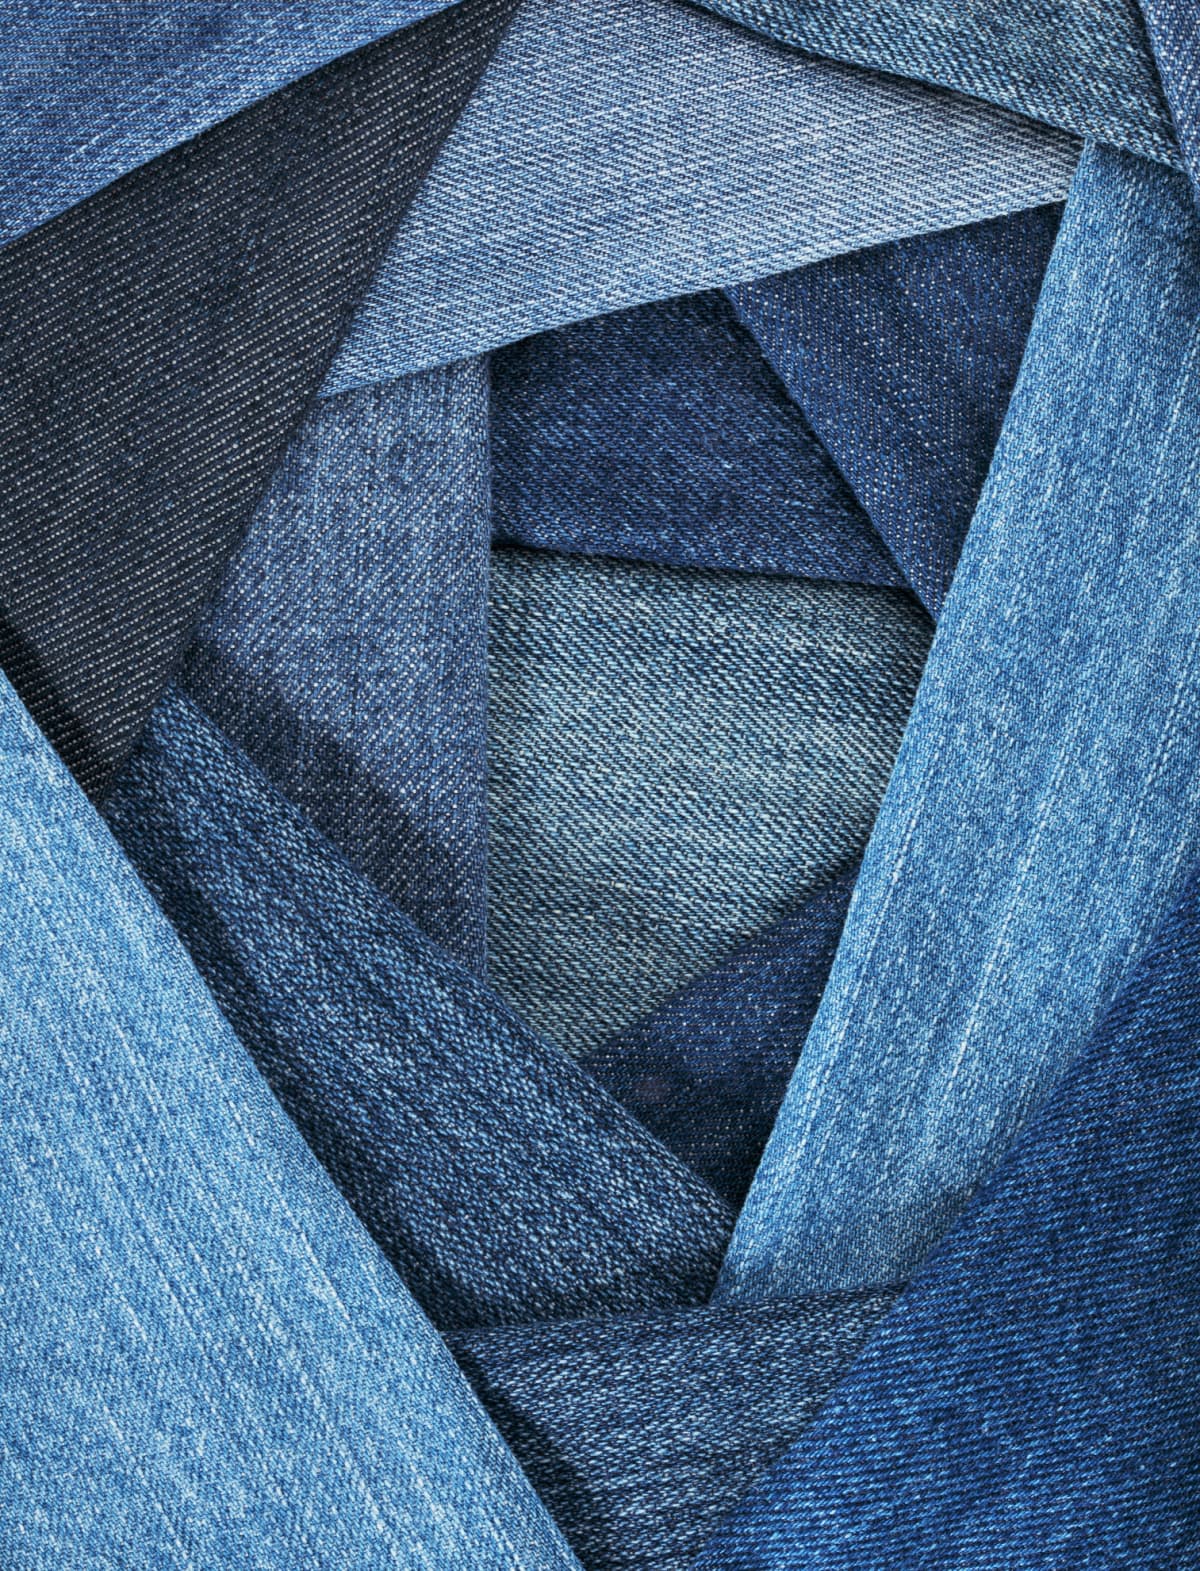 Different shades of denim in a circle